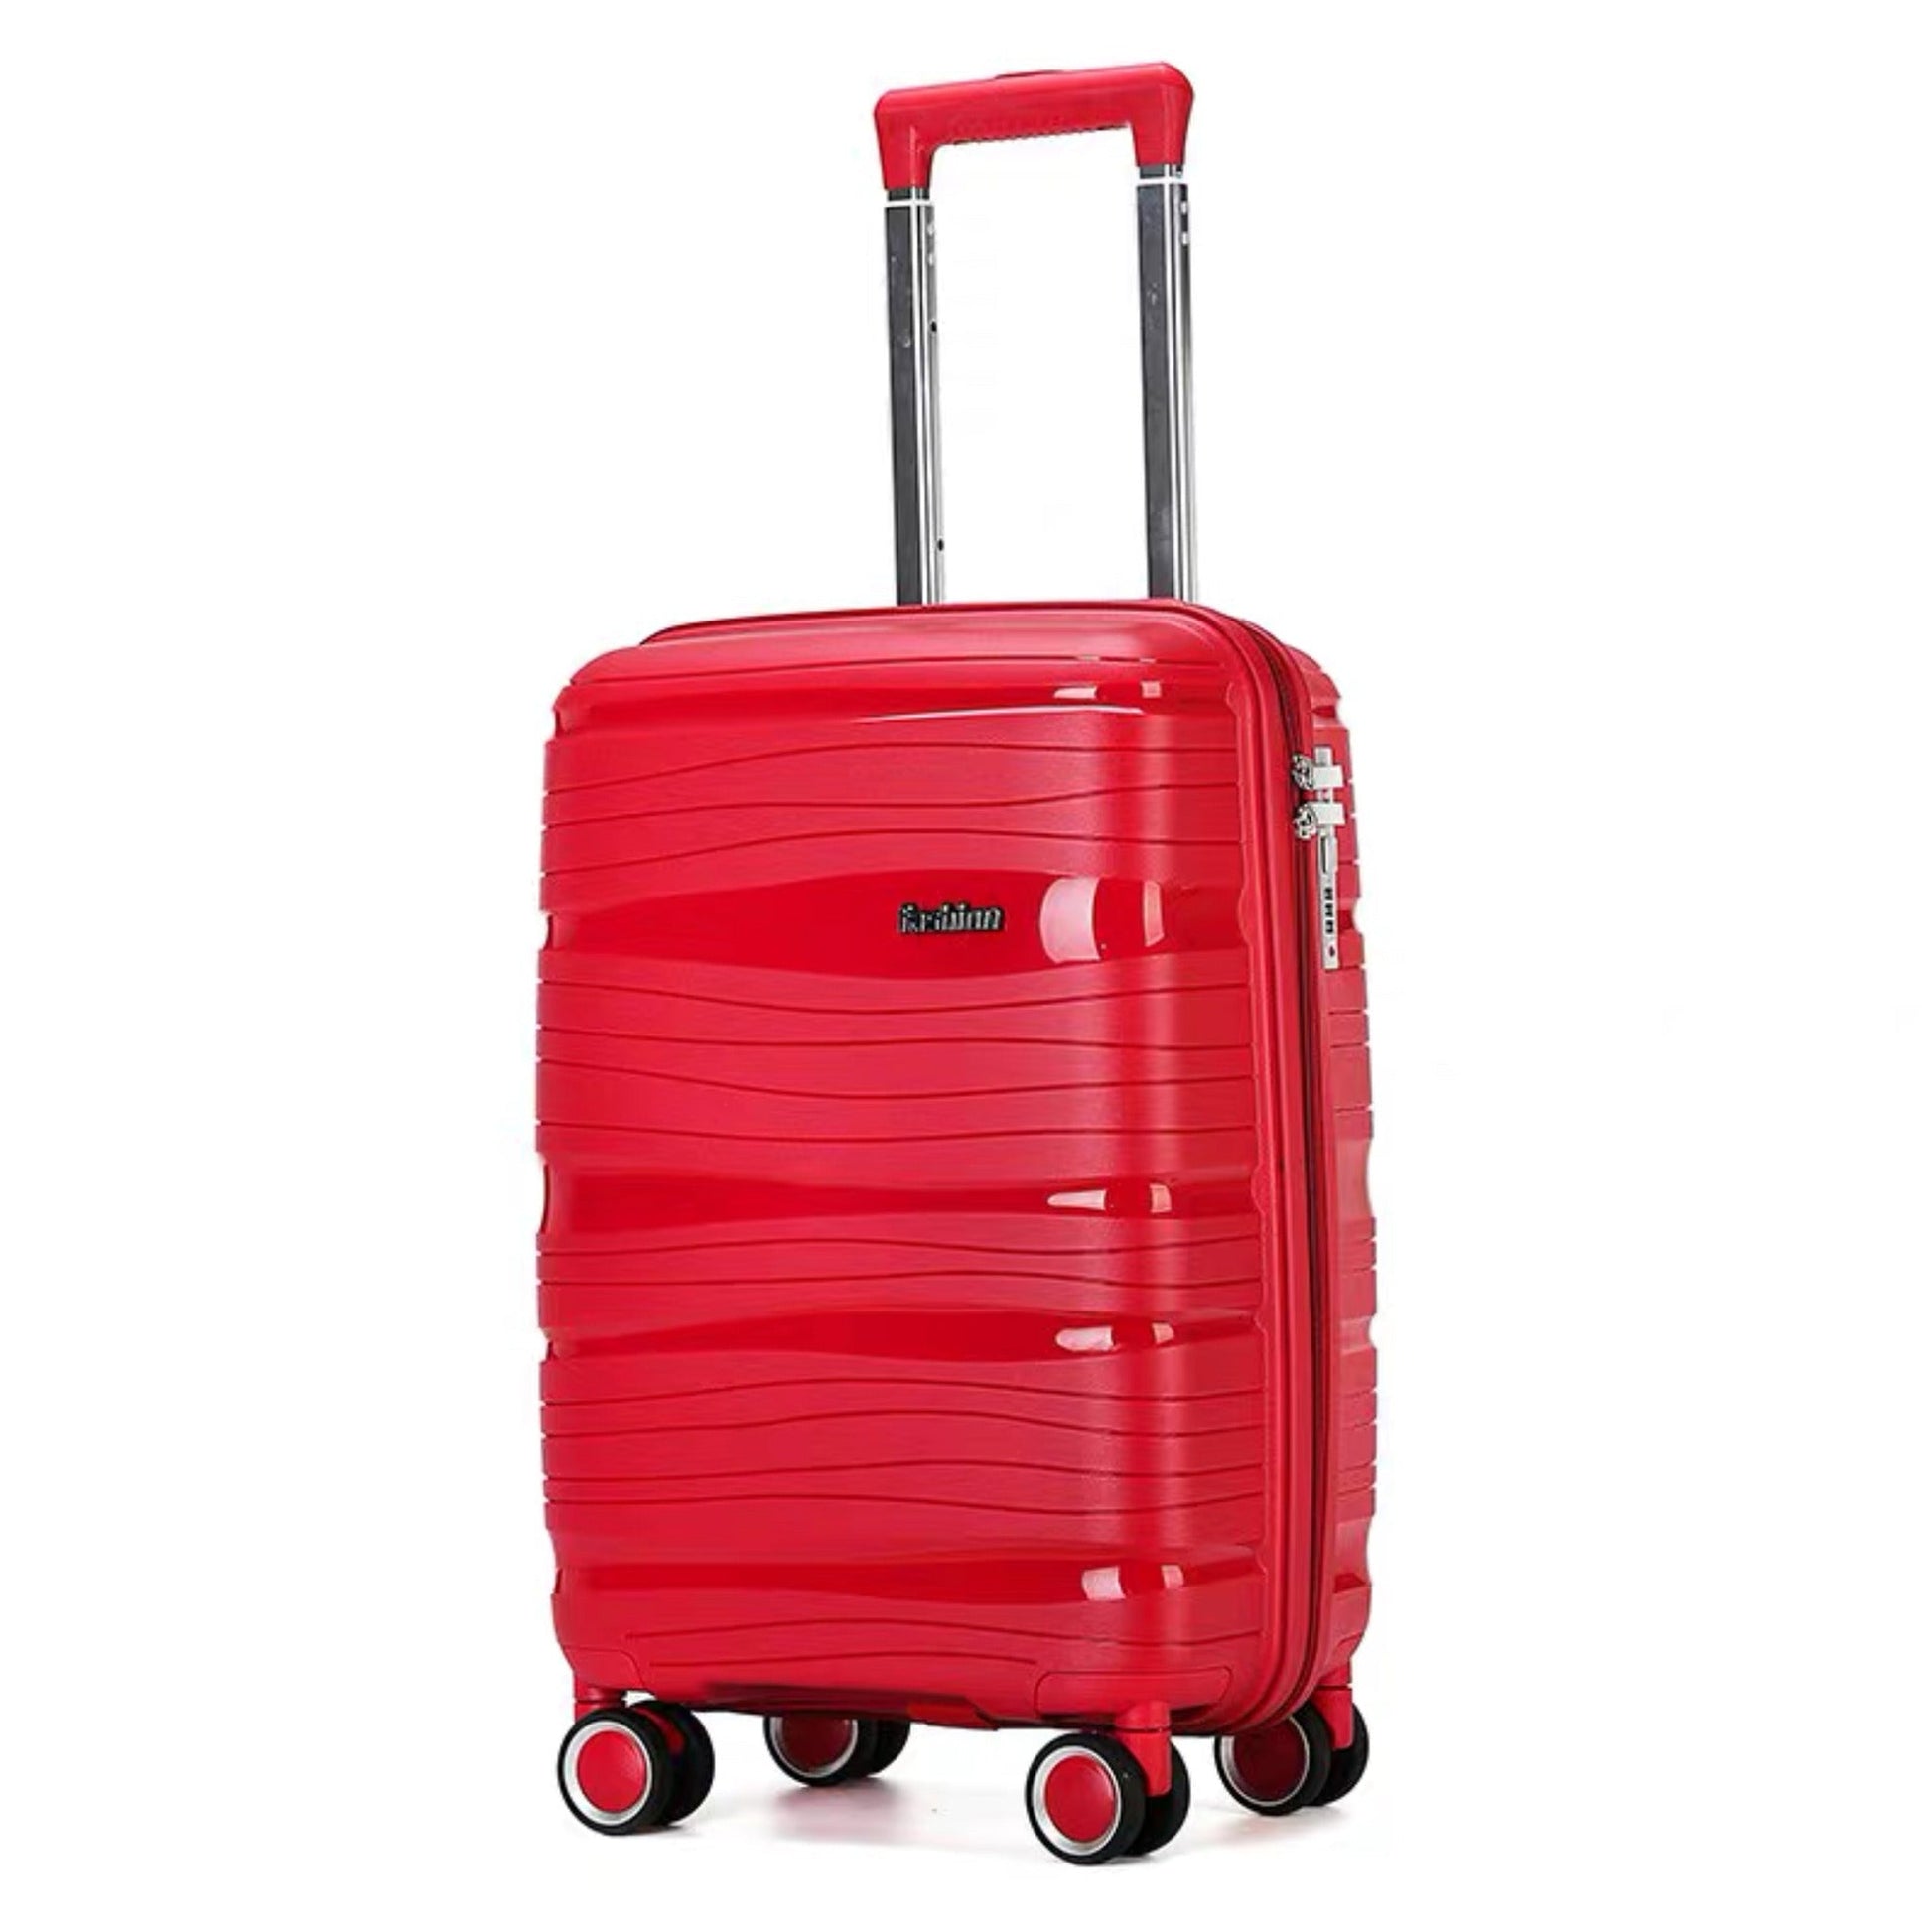 24" Red Colour Royal PP Luggage Lightweight Hard Case Trolley Bag With Double Spinner Wheel Zaappy.com